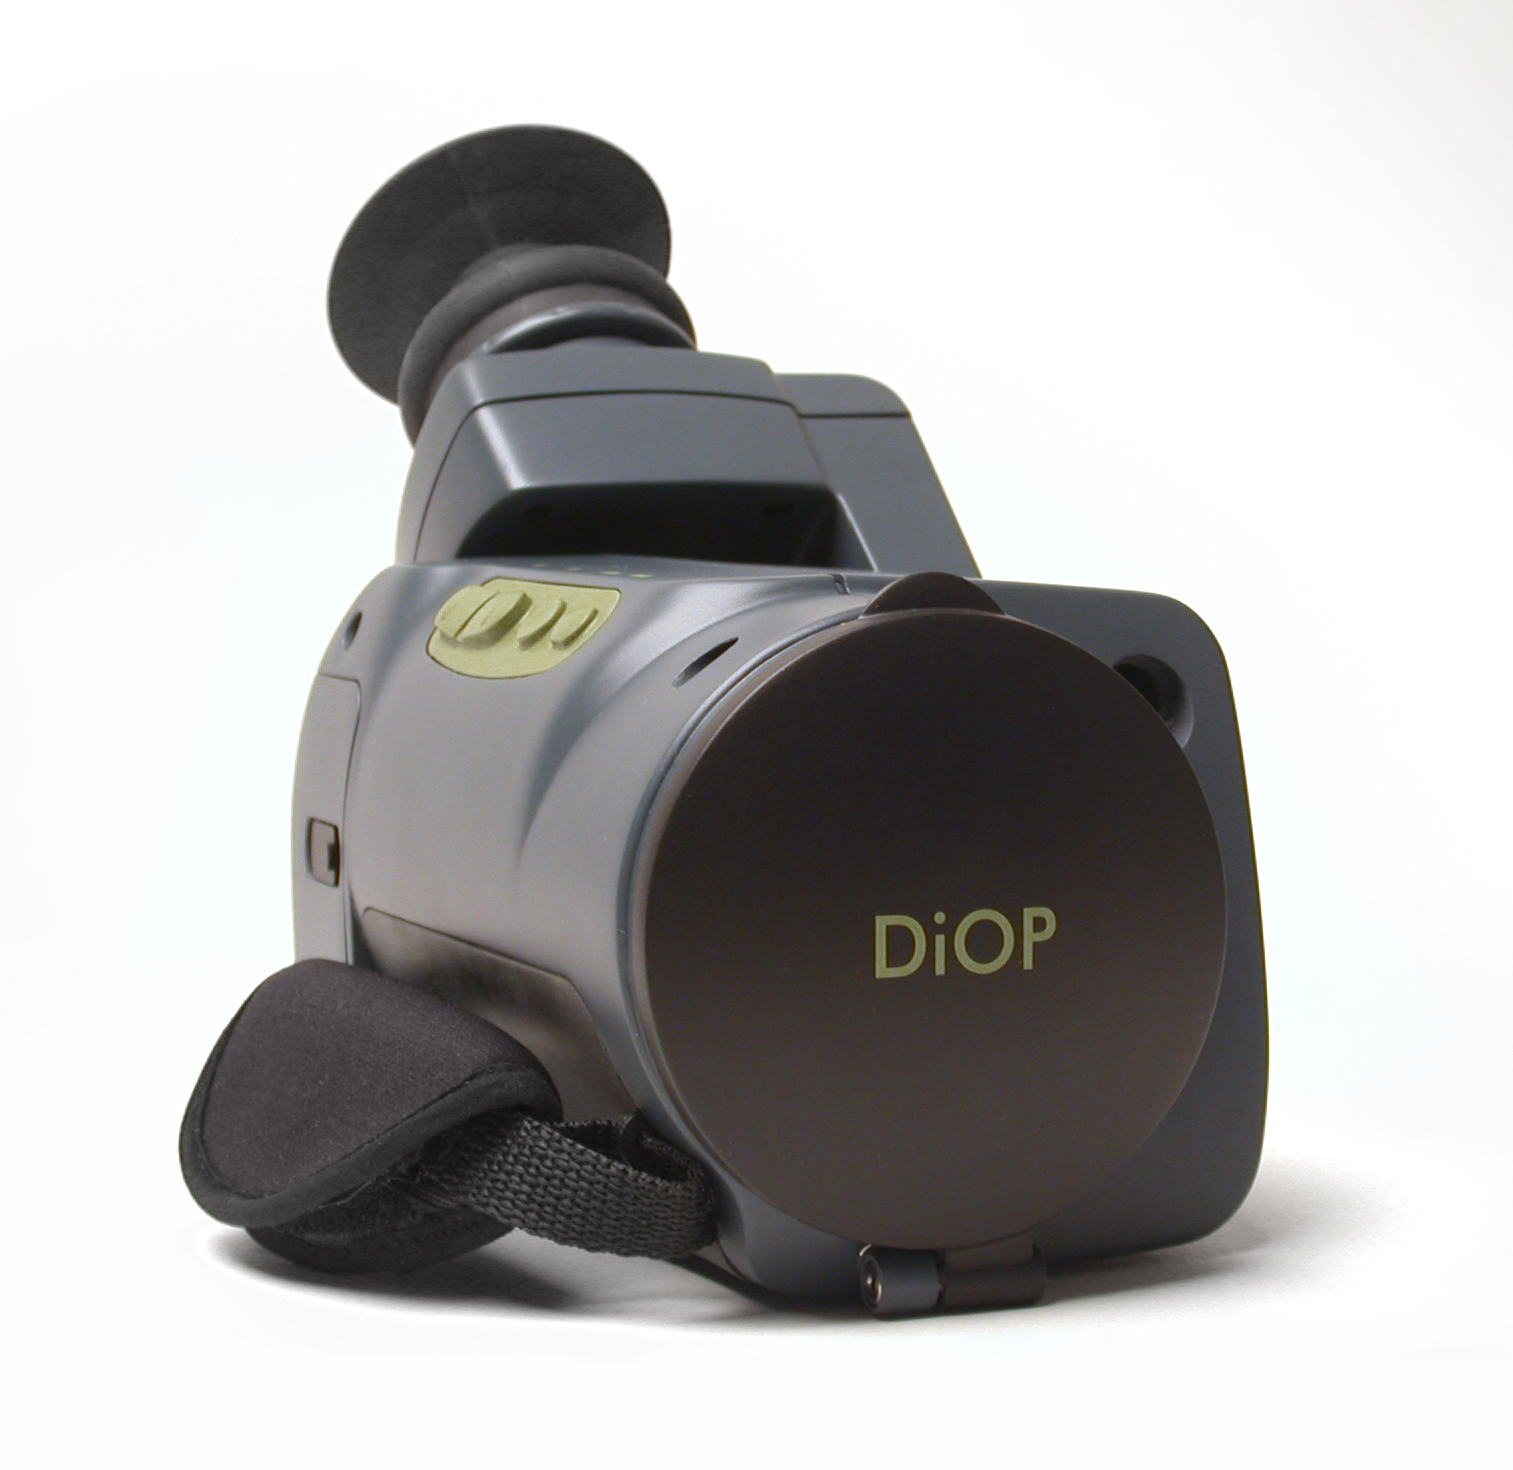 DiOP Cadet75 Thermal Imager